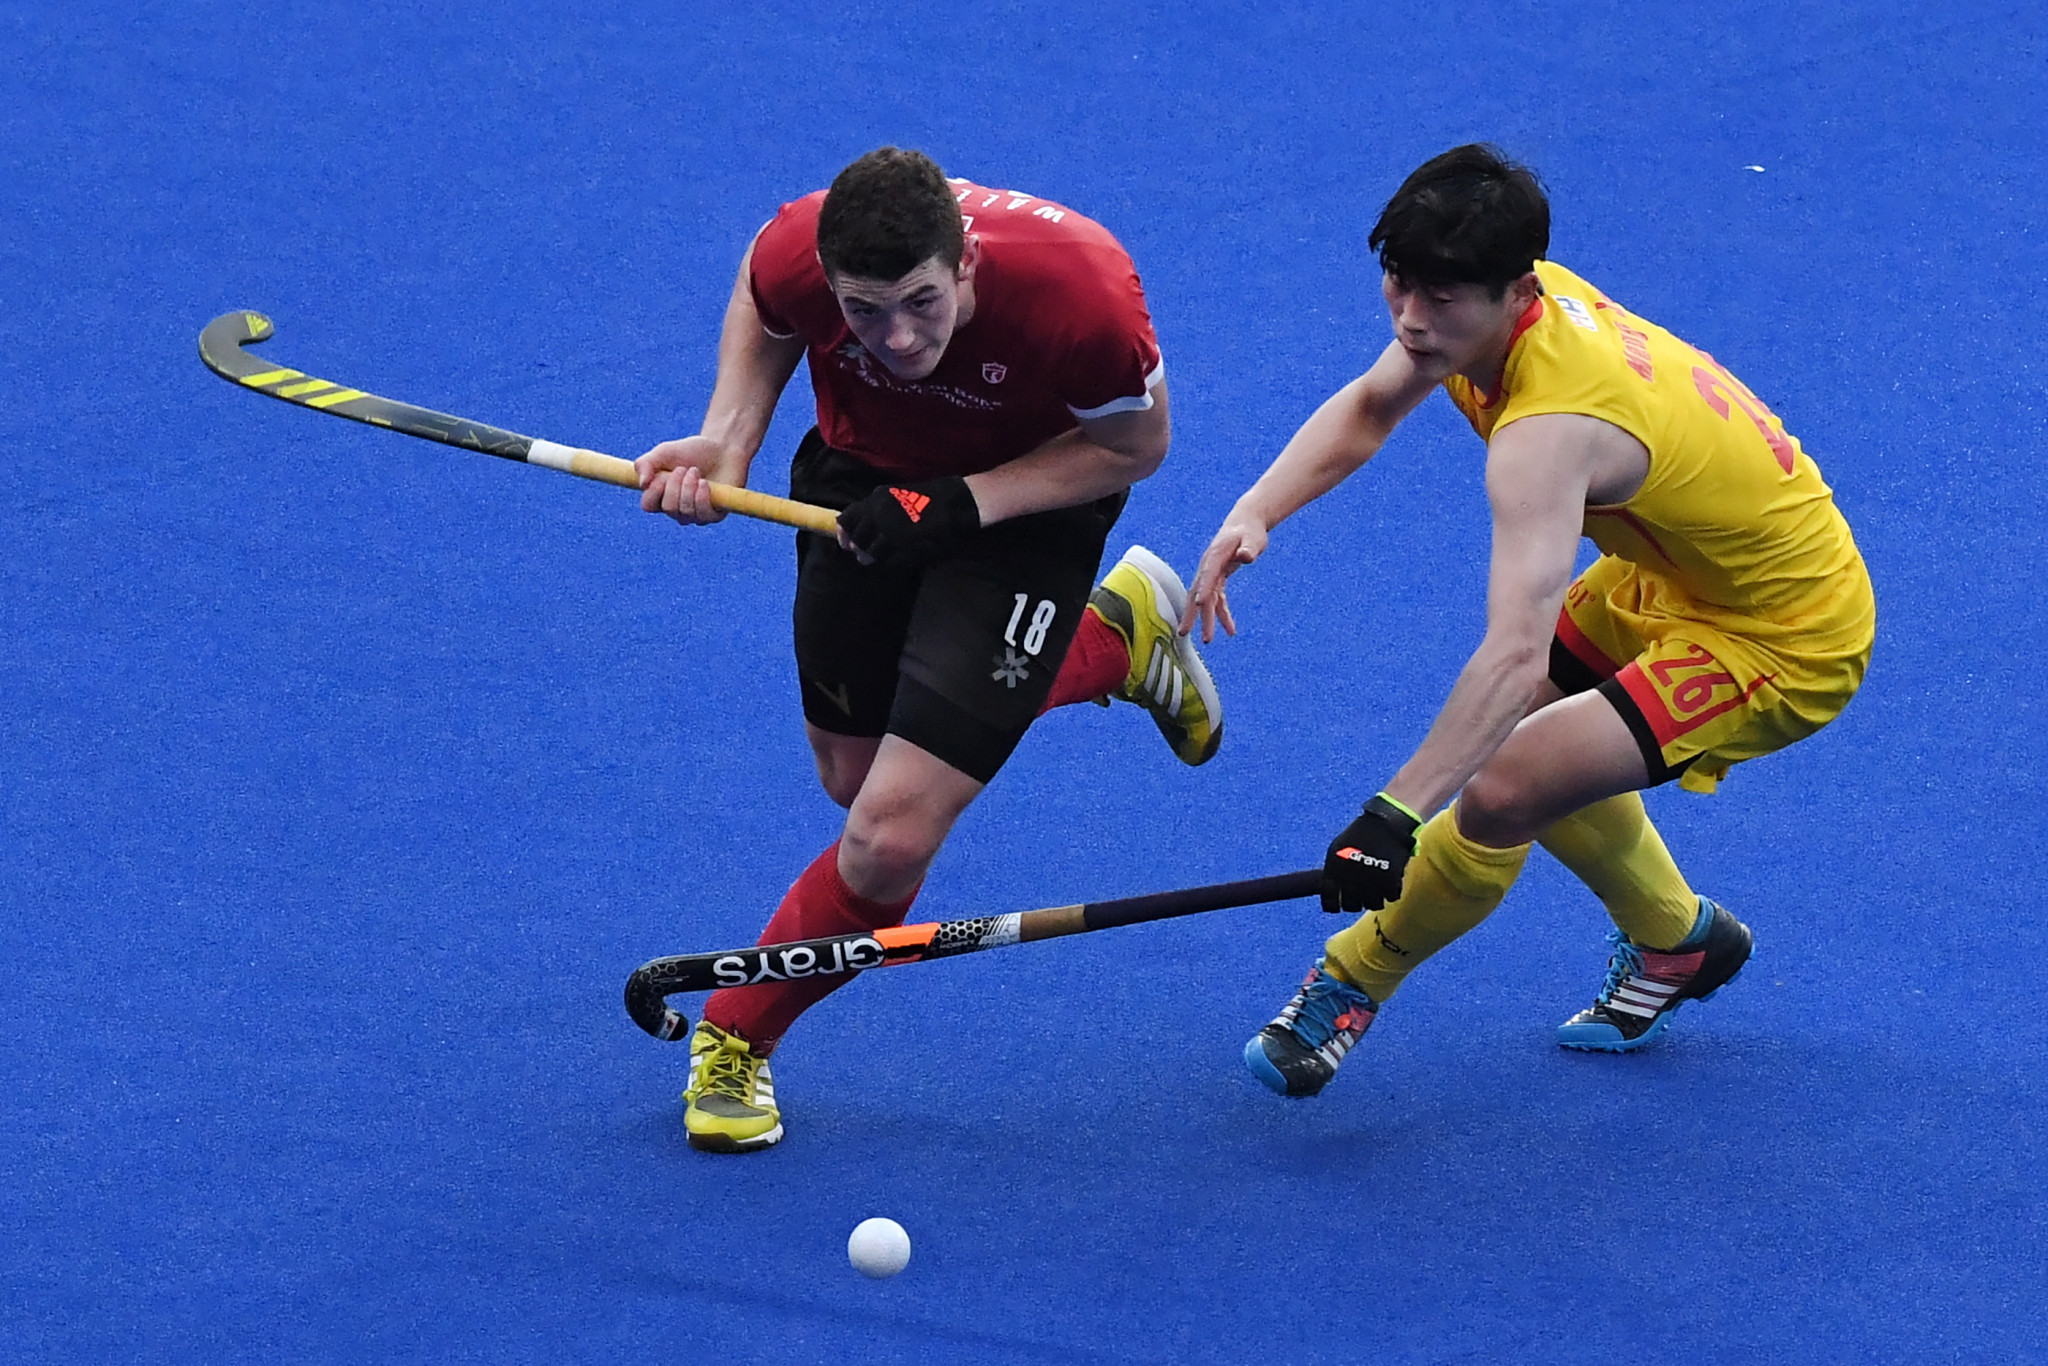 Canada progressed to the semi-final of the FIH Series Finals after defeating China in a shootout ©Getty Images